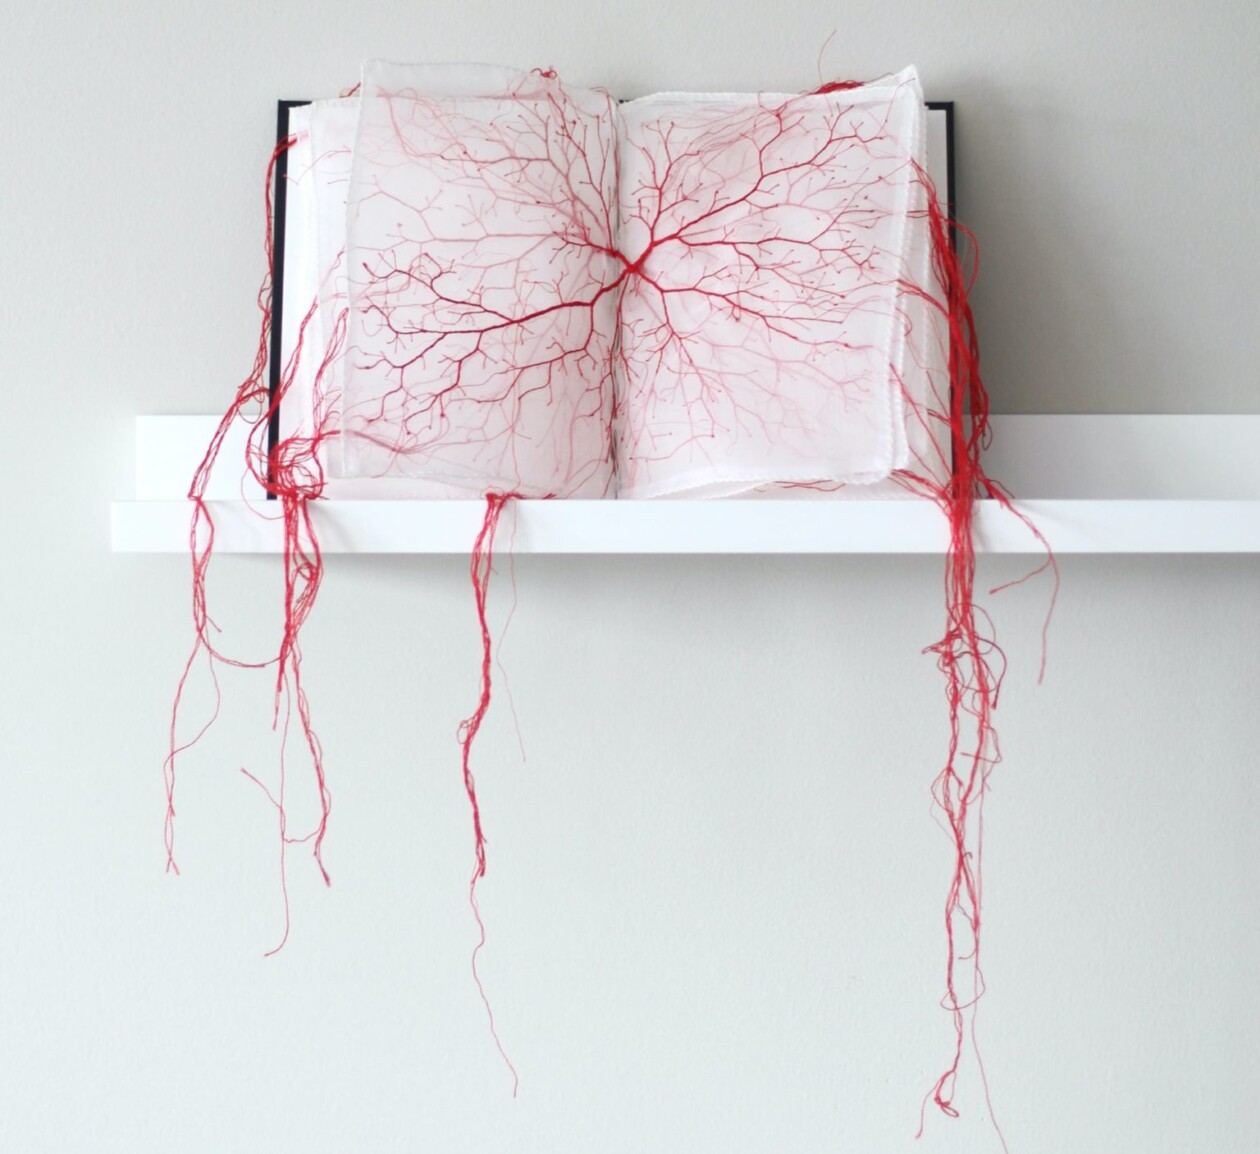 Red Threads, Intriguing Mixed Media Sculptures By Rima Day (7)